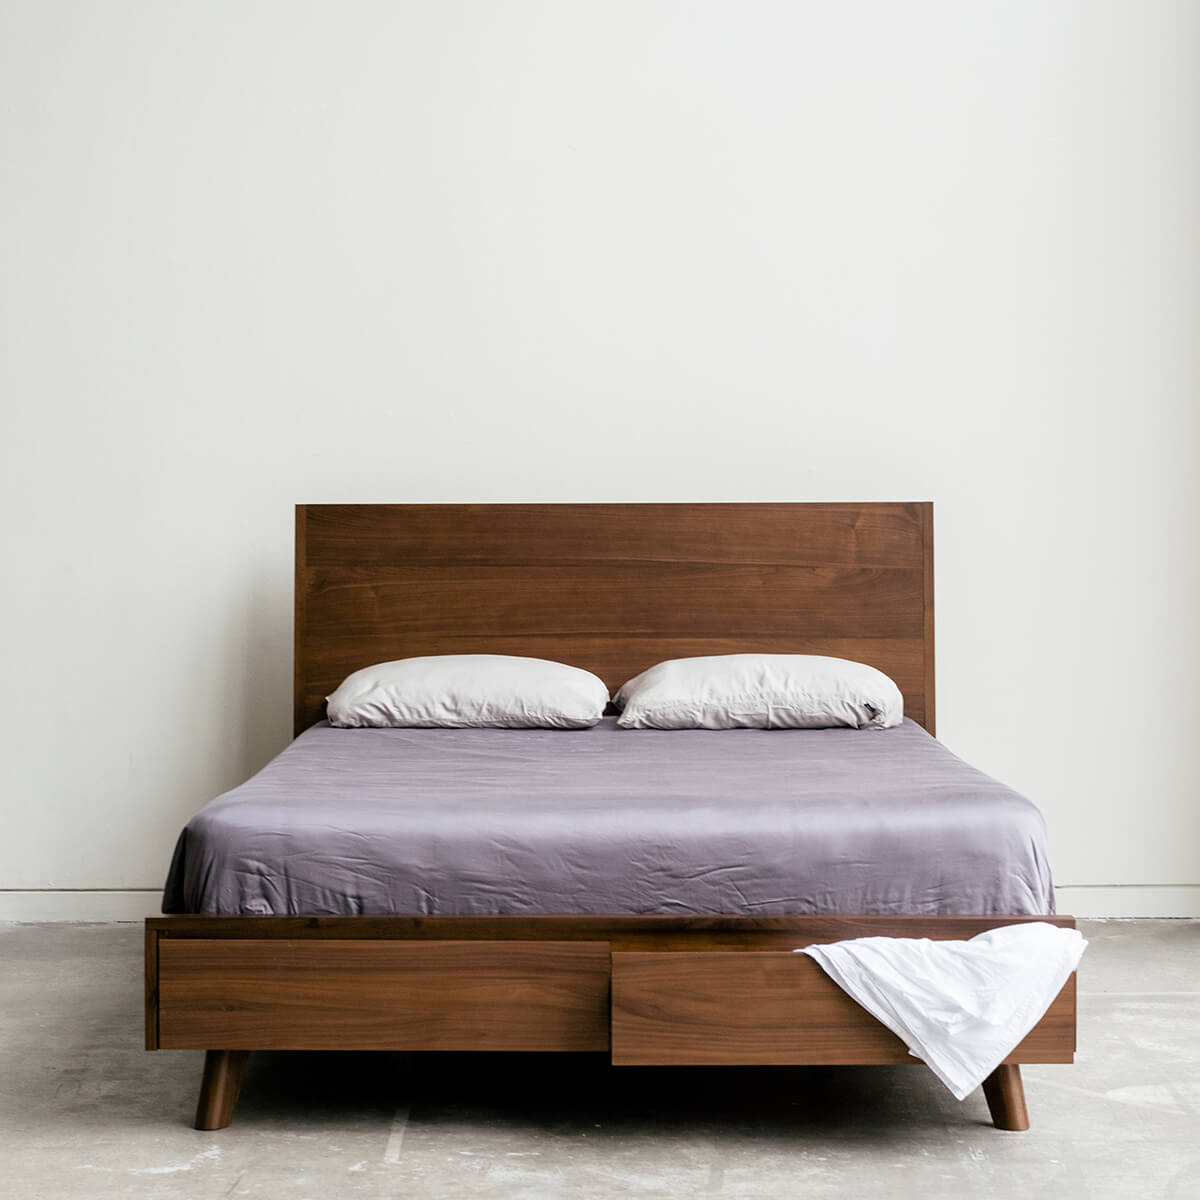 Mim Concept best Modern furniture stores in Toronto, Ottawa and Mississauga to sell modern contemporary bedroom furniture and condo furniture. Minimal mid century modern bed Low profile platform storage bed solid walnut wood modern organic